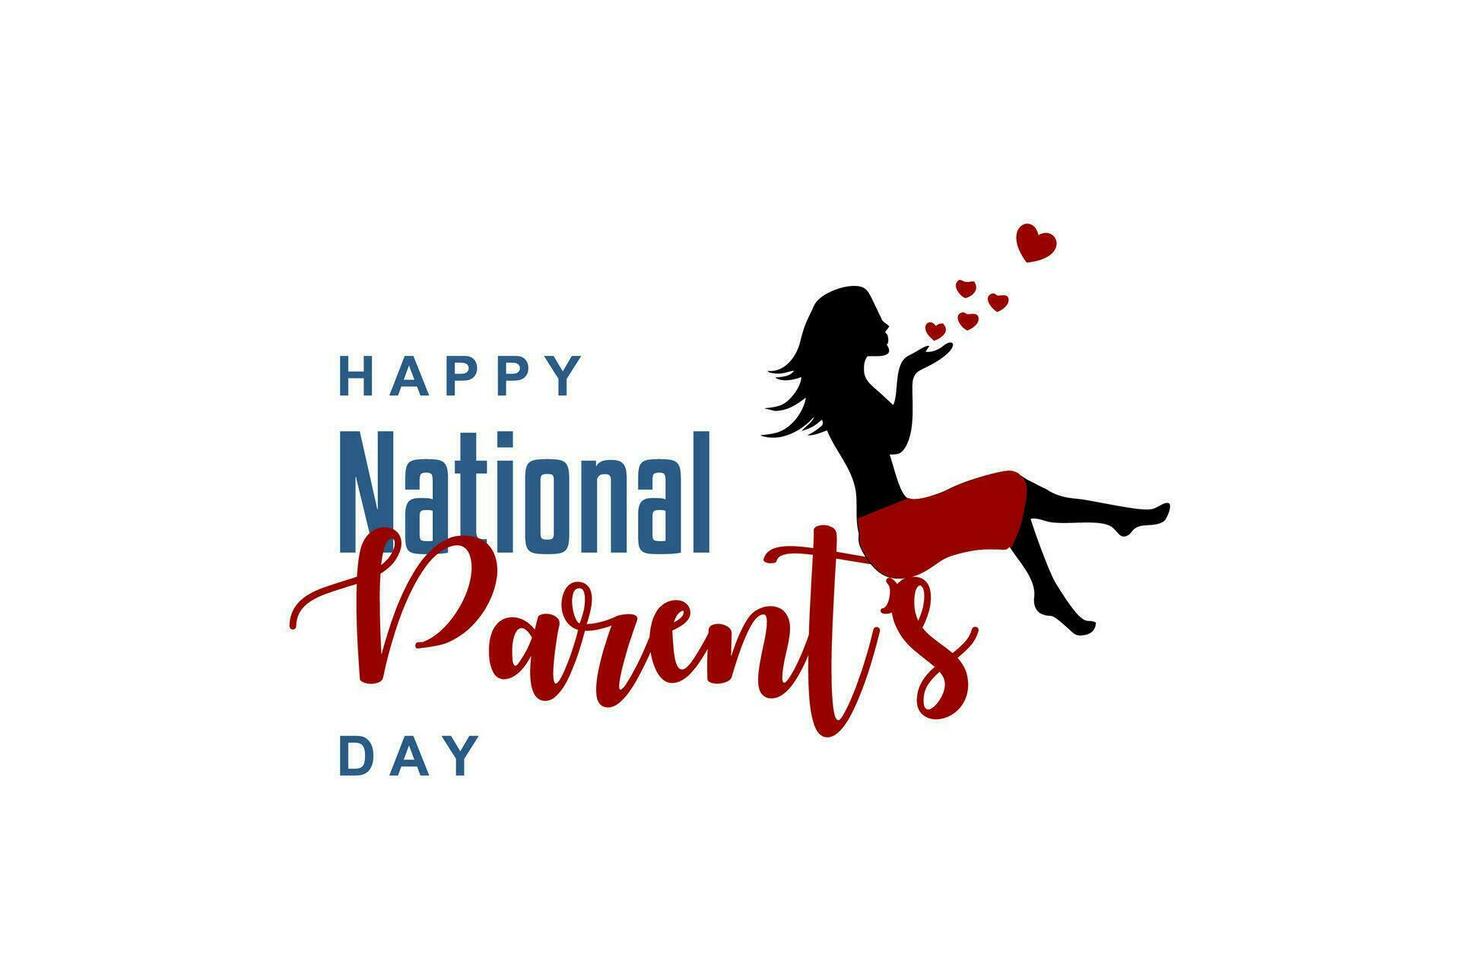 national parents day, background template Holiday concept vector